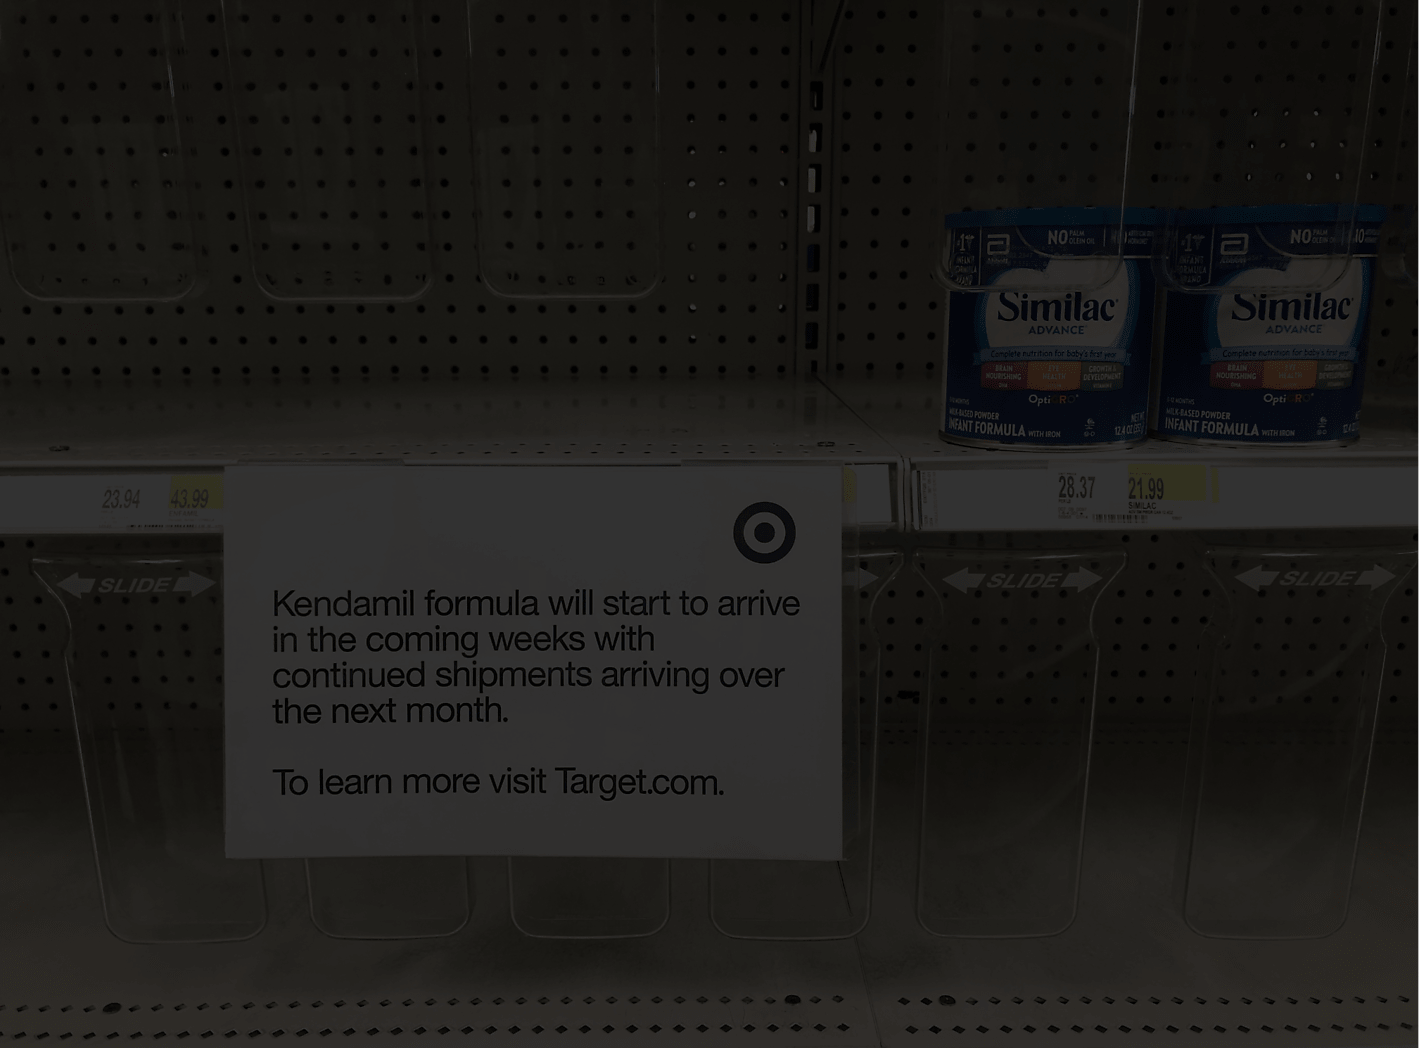 Notice on an almost empty shelf at Target that Kendamil will start to arrive in a few weeks